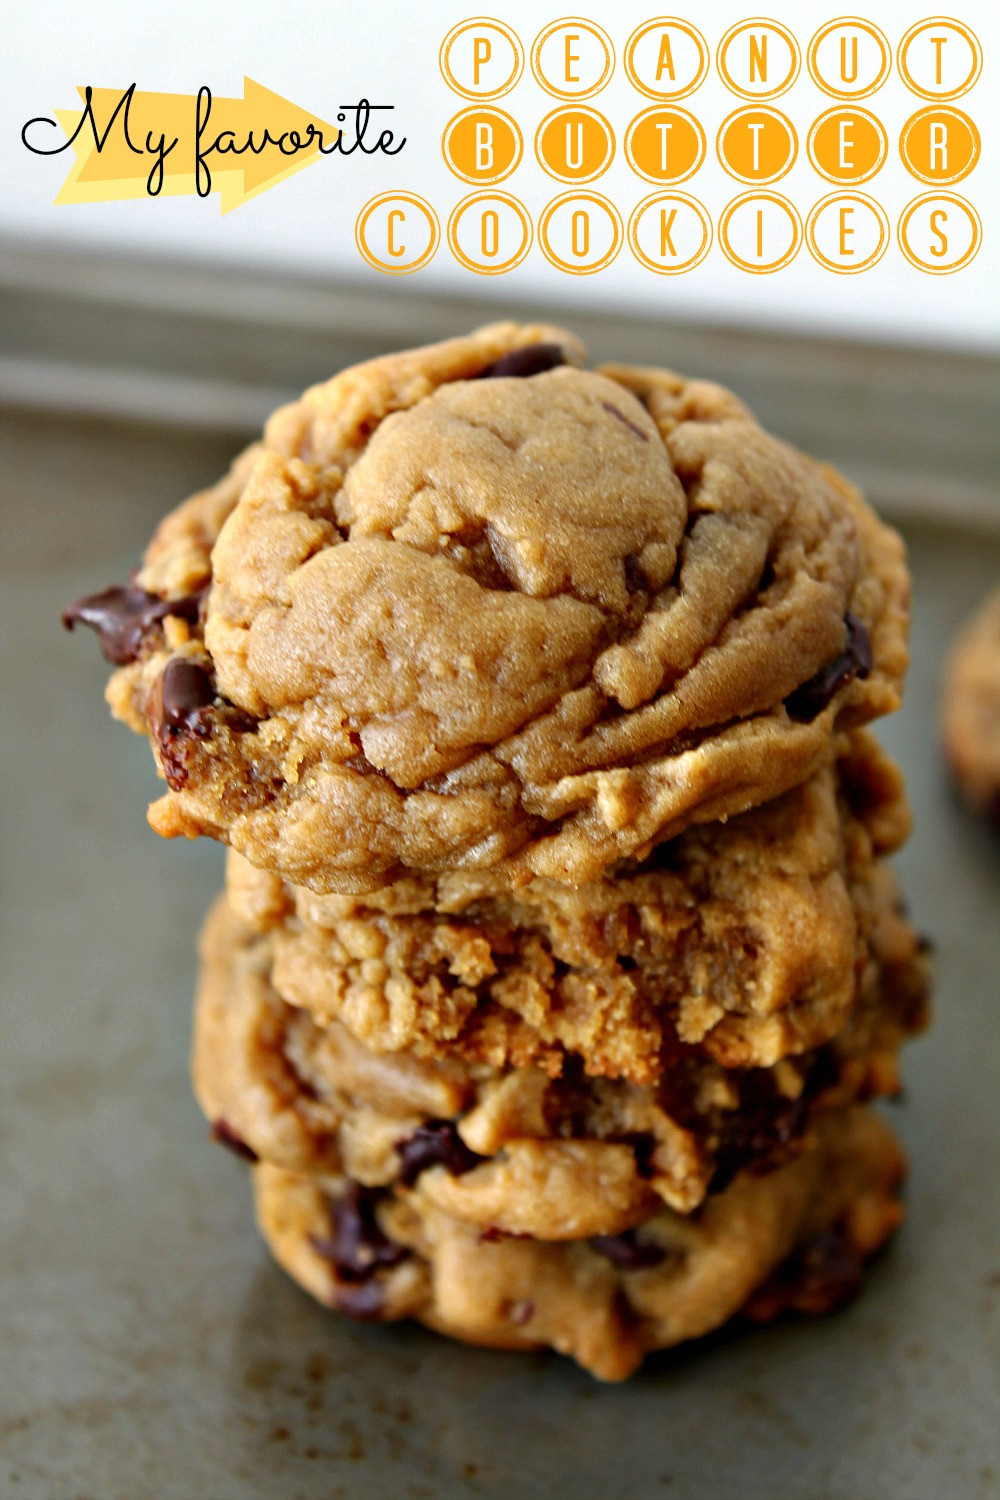 Best Chewy Peanut Butter Cookies
 My Favorite Puffy Chewy Peanut Butter Chocolate Chip